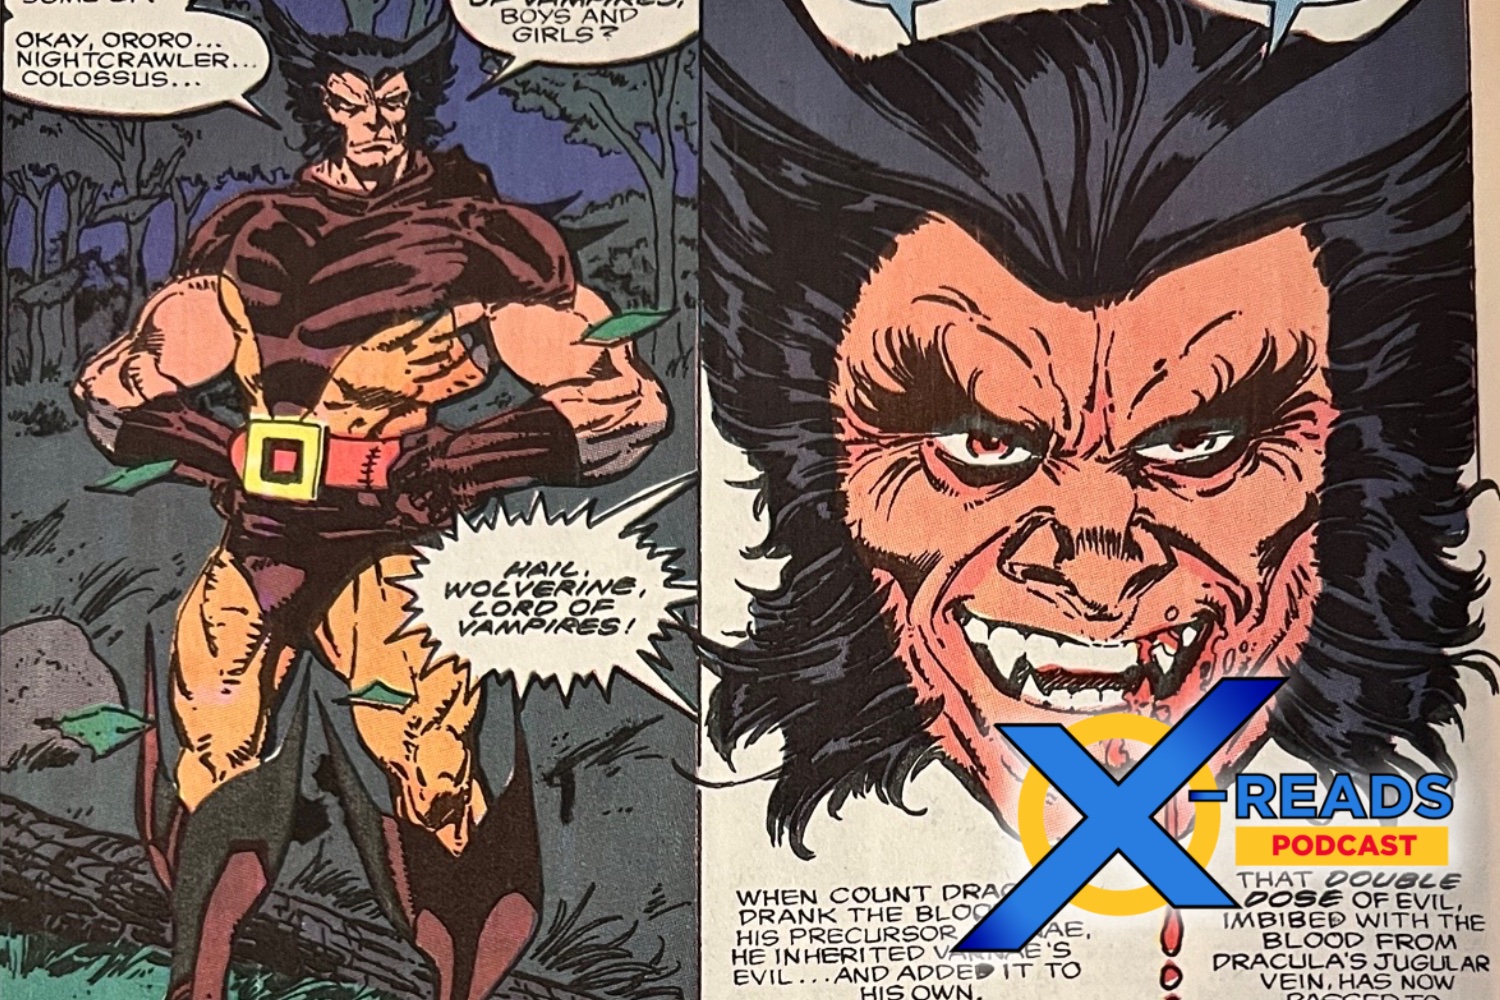 X-Reads Podcast Episode 87: 'What If… Wolverine Was Lord of the Vampires?'